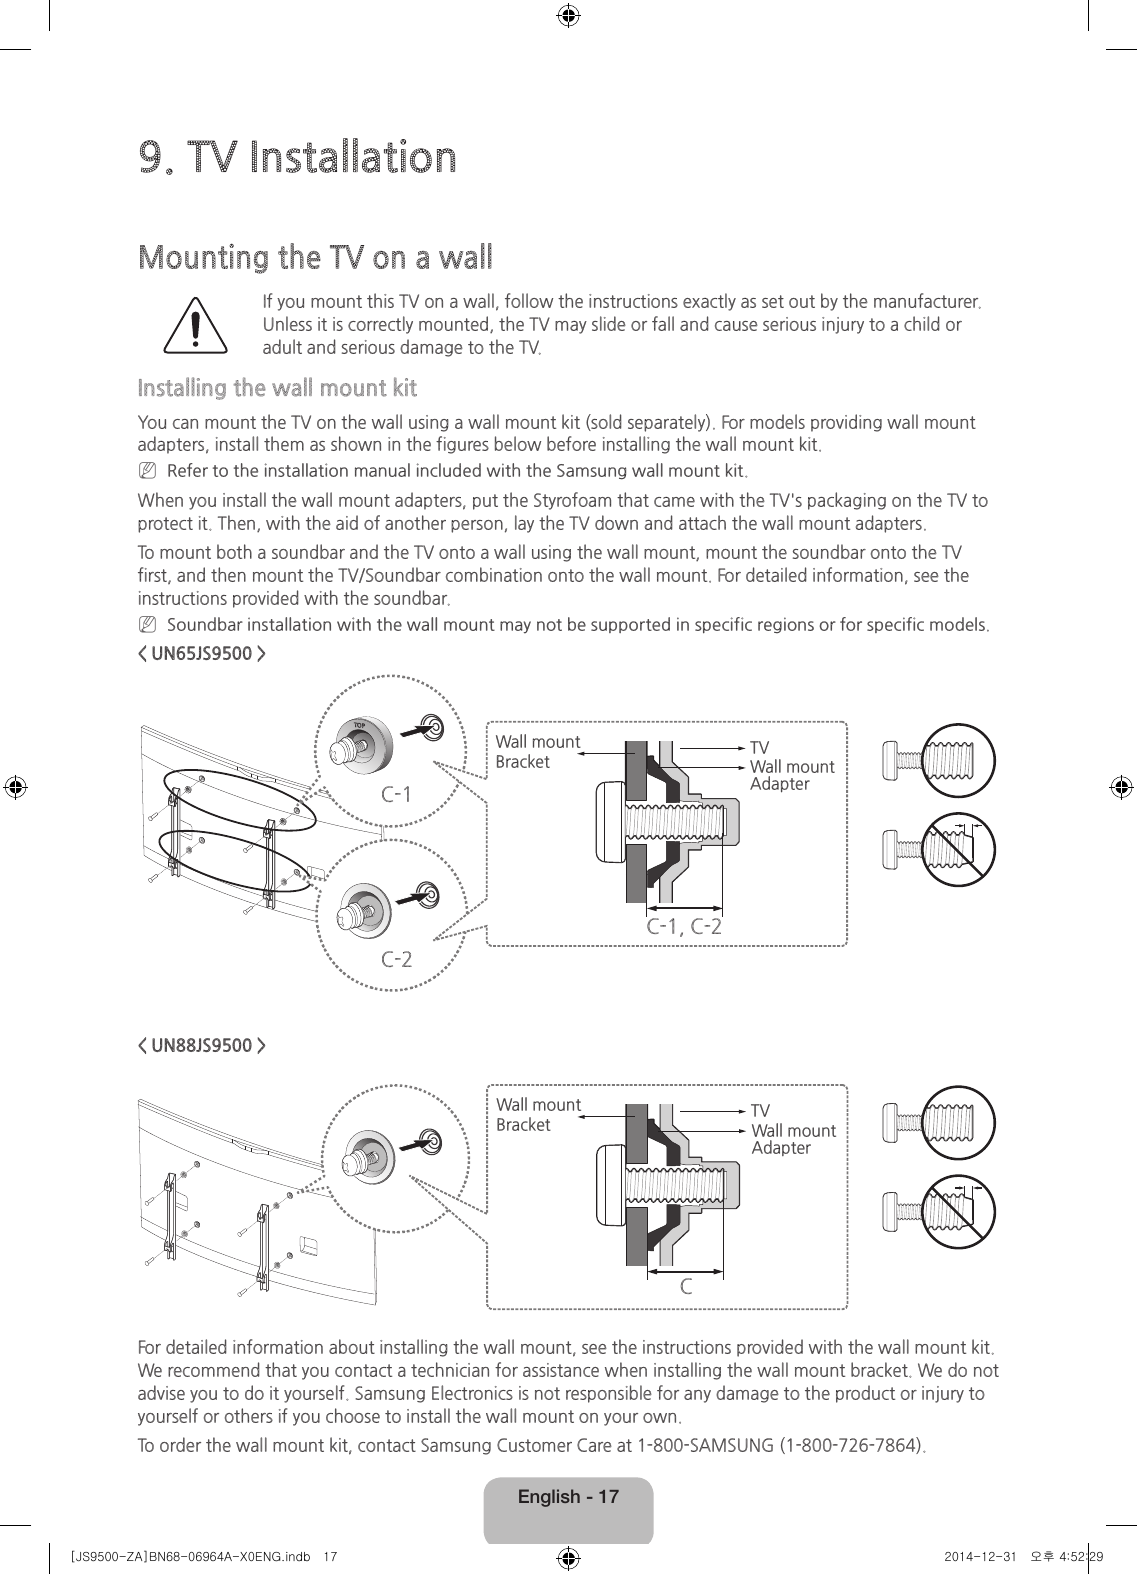 English - 179. TV InstallationMounting the TV on a wallIf you mount this TV on a wall, follow the instructions exactly as set out by the manufacturer. Unless it is correctly mounted, the TV may slide or fall and cause serious injury to a child or adult and serious damage to the TV.Installing the wall mount kitYou can mount the TV on the wall using a wall mount kit (sold separately). For models providing wall mount adapters, install them as shown in the figures below before installing the wall mount kit. NRefer to the installation manual included with the Samsung wall mount kit.When you install the wall mount adapters, put the Styrofoam that came with the TV&apos;s packaging on the TV to protect it. Then, with the aid of another person, lay the TV down and attach the wall mount adapters.To mount both a soundbar and the TV onto a wall using the wall mount, mount the soundbar onto the TV first, and then mount the TV/Soundbar combination onto the wall mount. For detailed information, see the instructions provided with the soundbar. NSoundbar installation with the wall mount may not be supported in specific regions or for specific models.&lt; UN65JS9500 &gt;C-1C-2TVWall mount Bracket Wall mount AdapterC-1, C-2&lt; UN88JS9500 &gt;TVWall mount BracketCWall mount AdapterFor detailed information about installing the wall mount, see the instructions provided with the wall mount kit. We recommend that you contact a technician for assistance when installing the wall mount bracket. We do not advise you to do it yourself. Samsung Electronics is not responsible for any damage to the product or injury to yourself or others if you choose to install the wall mount on your own.To order the wall mount kit, contact Samsung Customer Care at 1-800-SAMSUNG (1-800-726-7864).[JS9500-ZA]BN68-06964A-X0ENG.indb   17 2014-12-31   오후 4:52:29